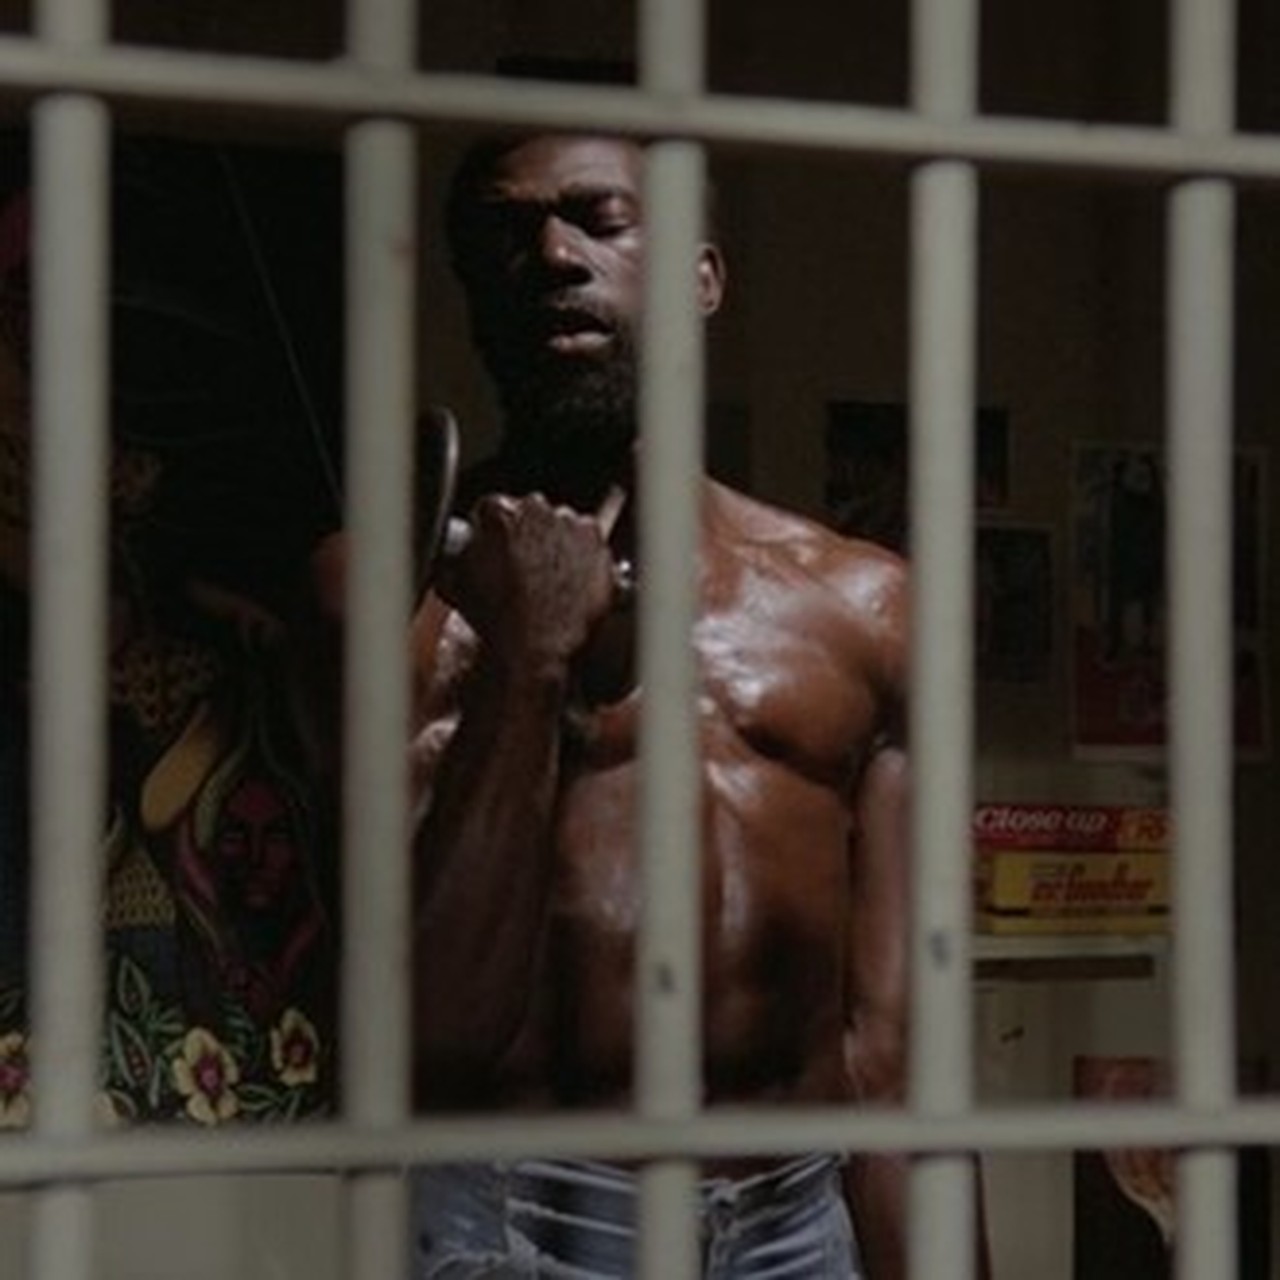 Hot Rape Forced Hollywood Sex - The Action Scene: â€œPenitentiaryâ€ and the Black Body in Crisis on Notebook |  MUBI